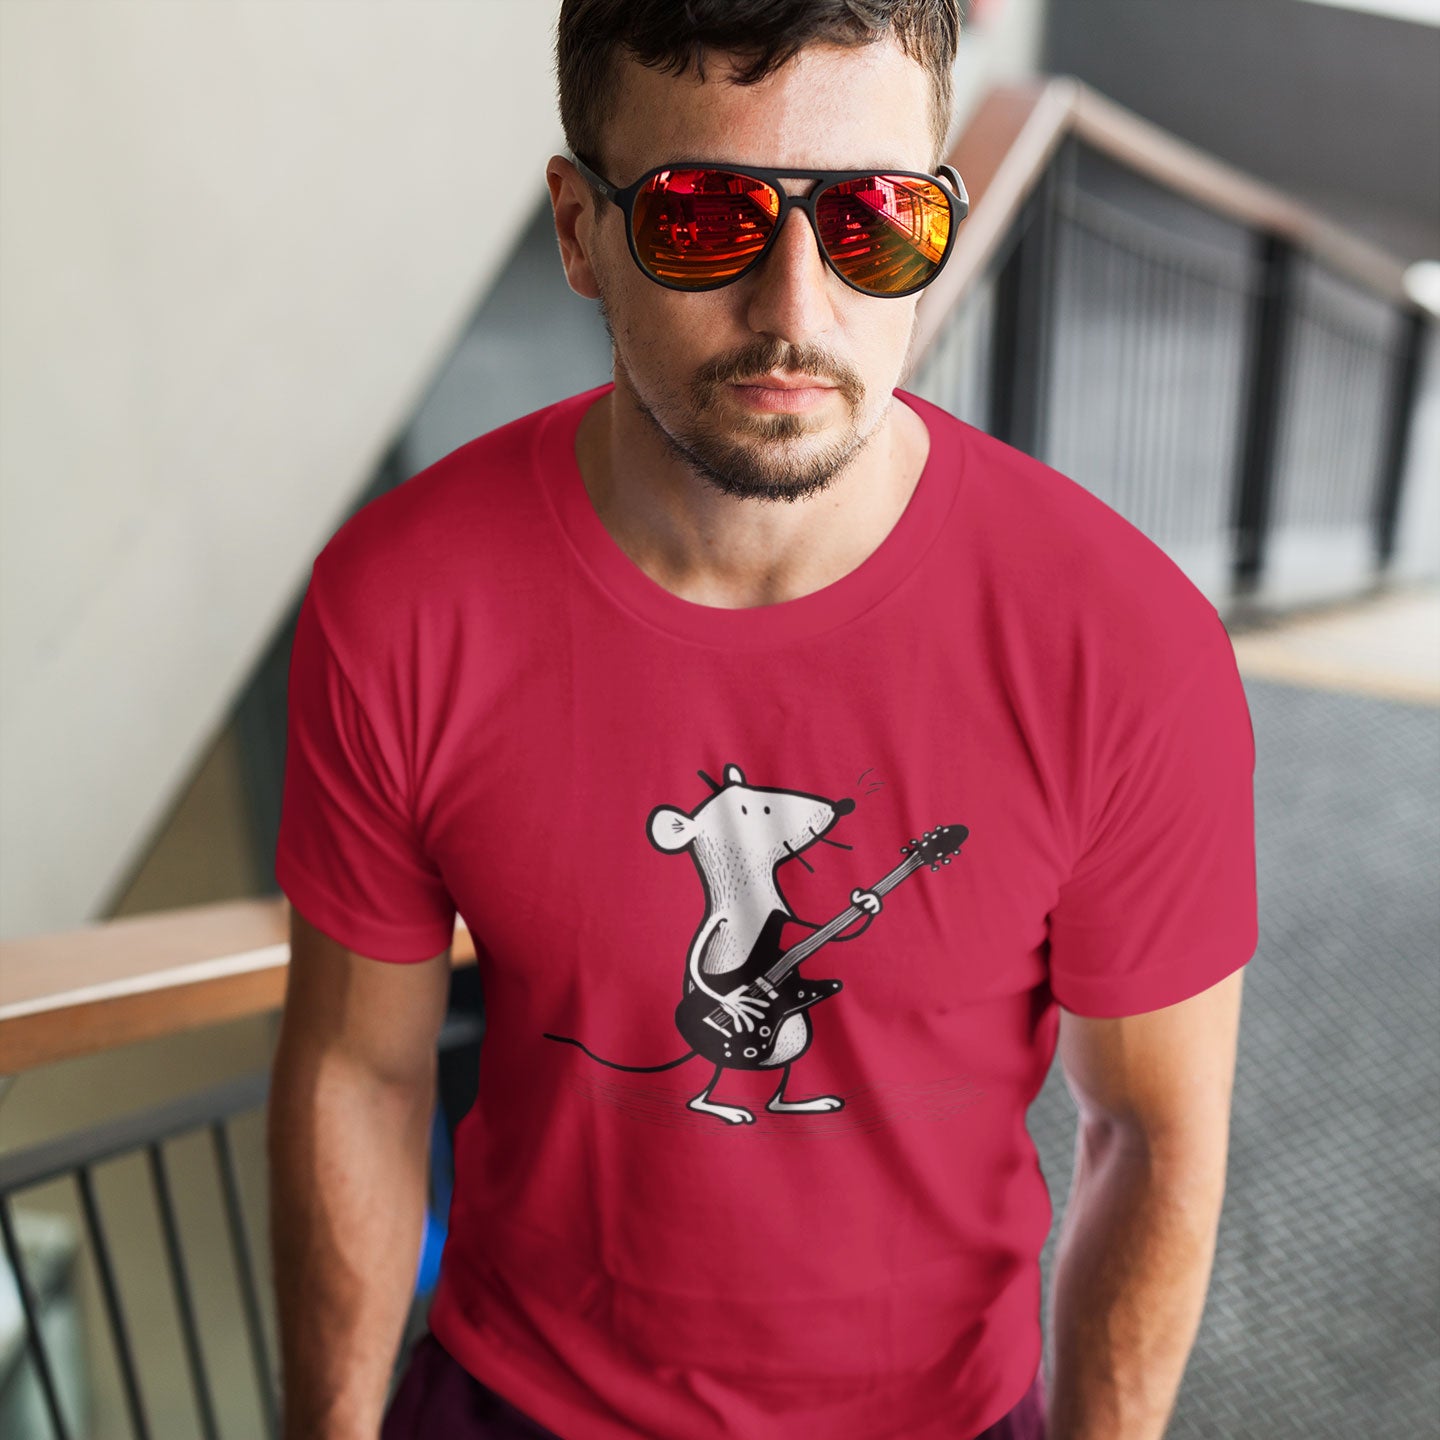 Guy wearing a red t-shirt with a mouse playing guitar print